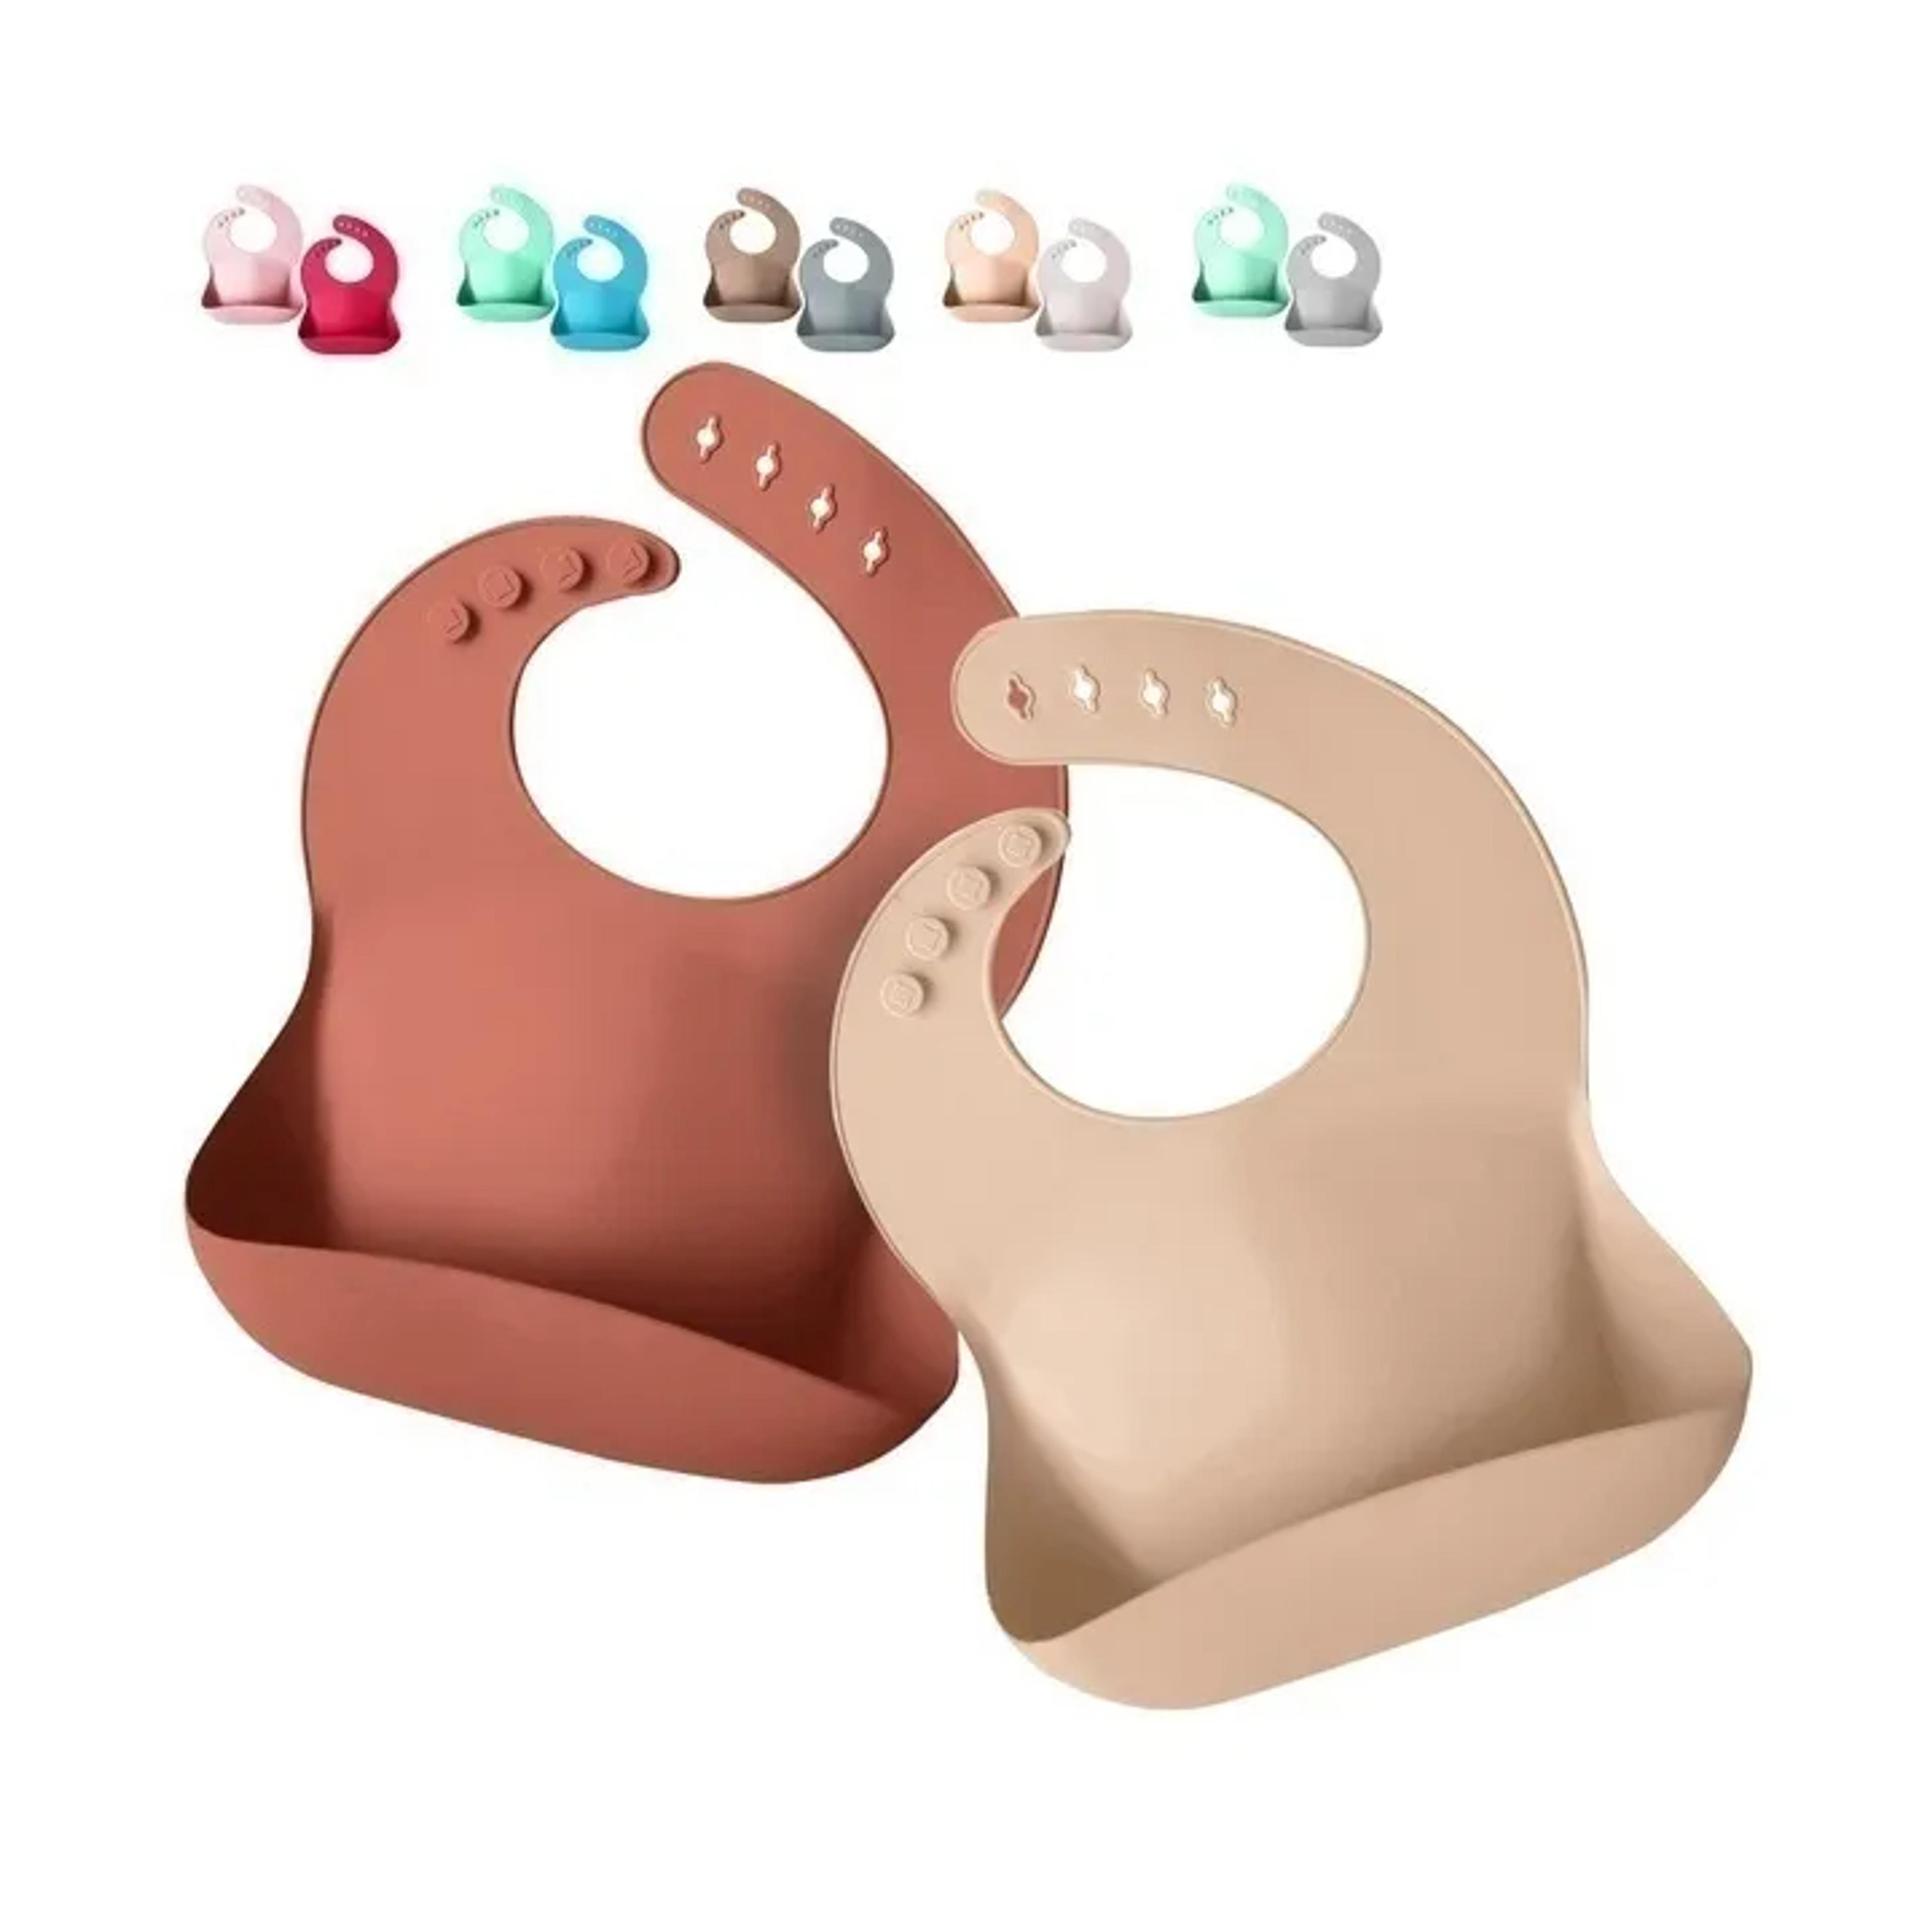 Amazon.com: Sperric Silicone Baby Bibs - Soft Silicone Bib with Food Catcher and Waterproof Material - Adjustable Fit for Baby and Toddler (Beige) : Baby